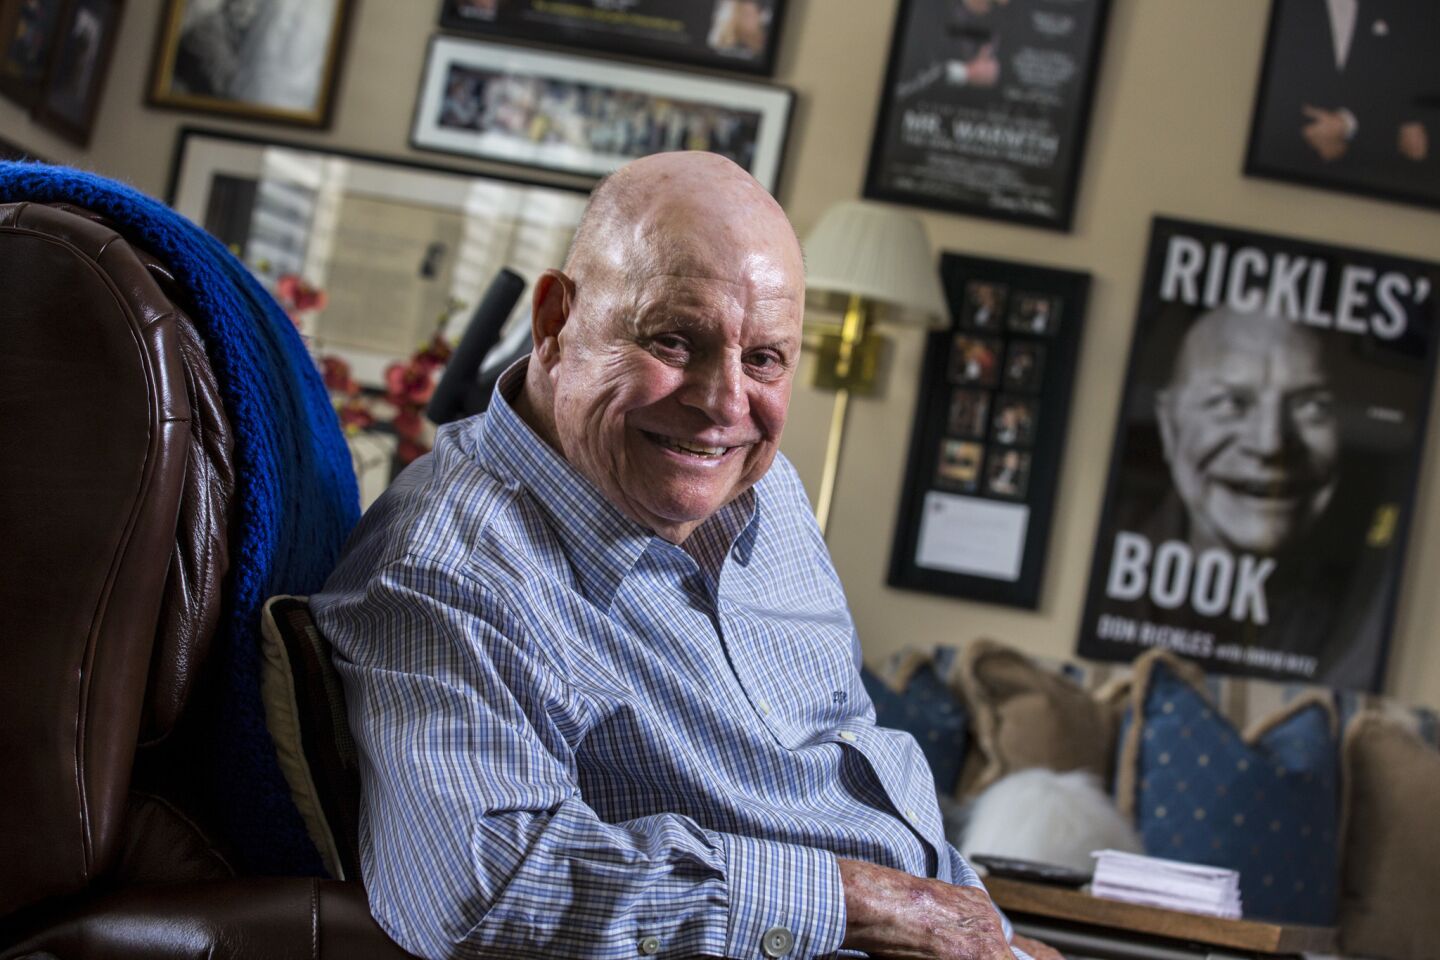 Rickles is photographed in his Los Angeles home on Oct. 12, 2015, around the release of a box set of Rickles' 1970s-era TV specials and his TV series, "CPO Sharkey."